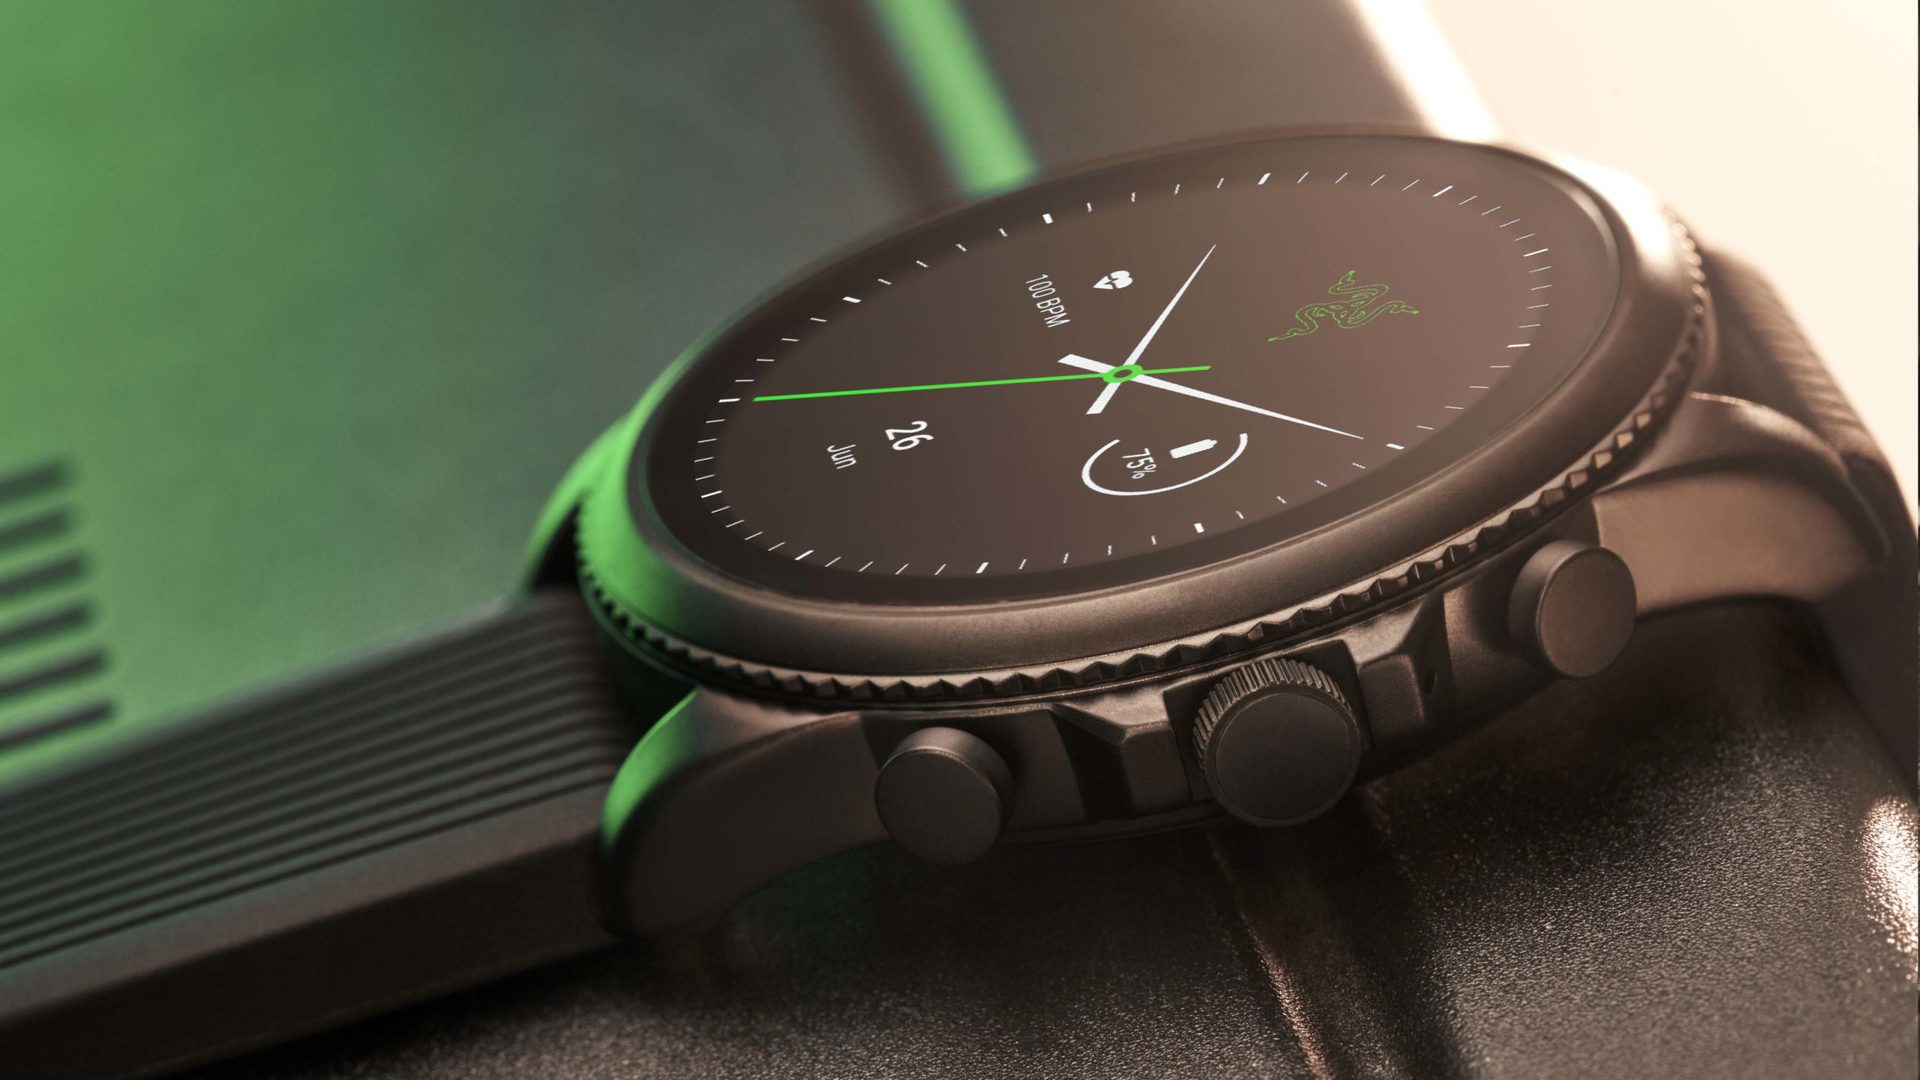 A beauty shot of the Razer X Fossil Gen 6 Smartwatch shows Razer's black and green aesthetic and the Razer logo on its watch face.